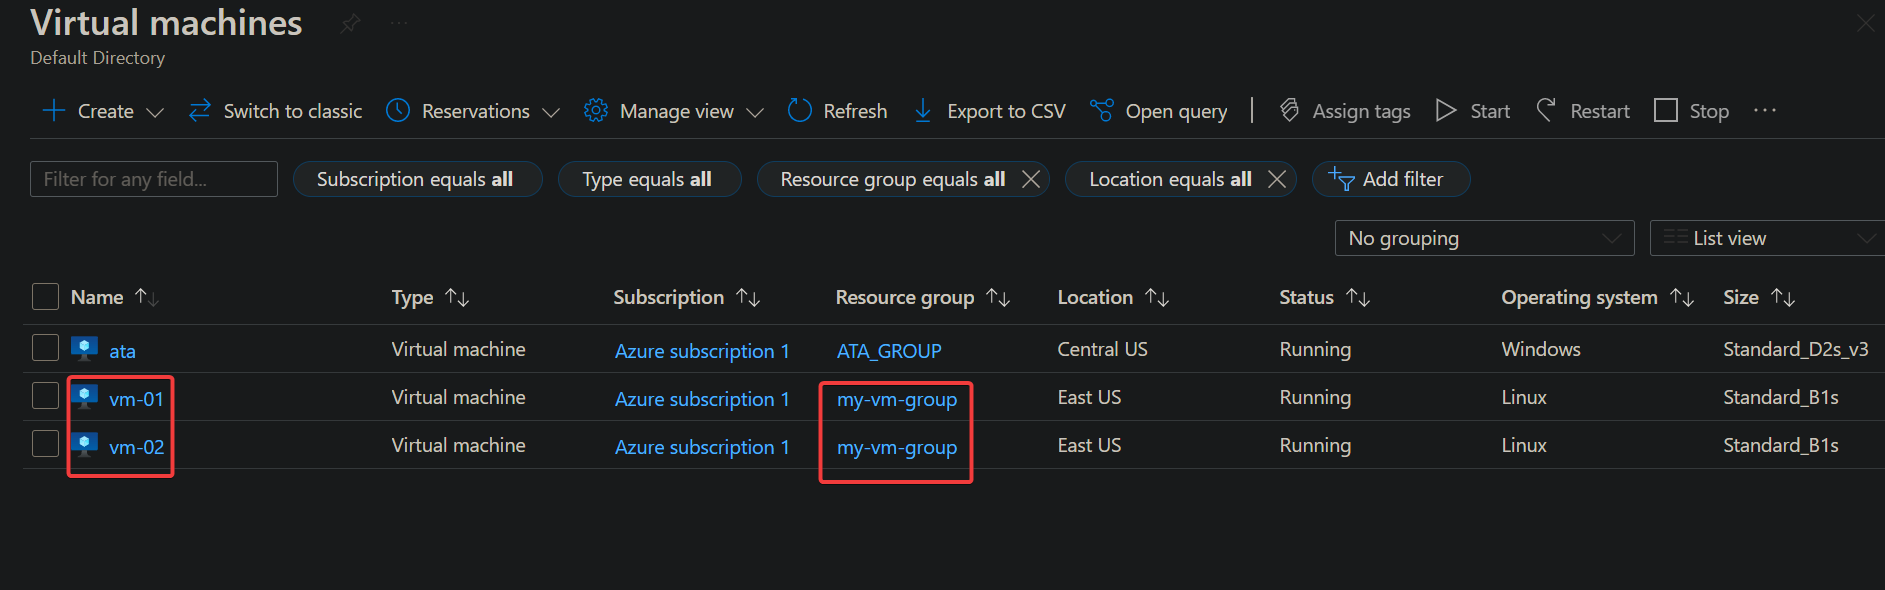 Verifying vm-01 and vm-02 are under the same resource group (my-vm-group)